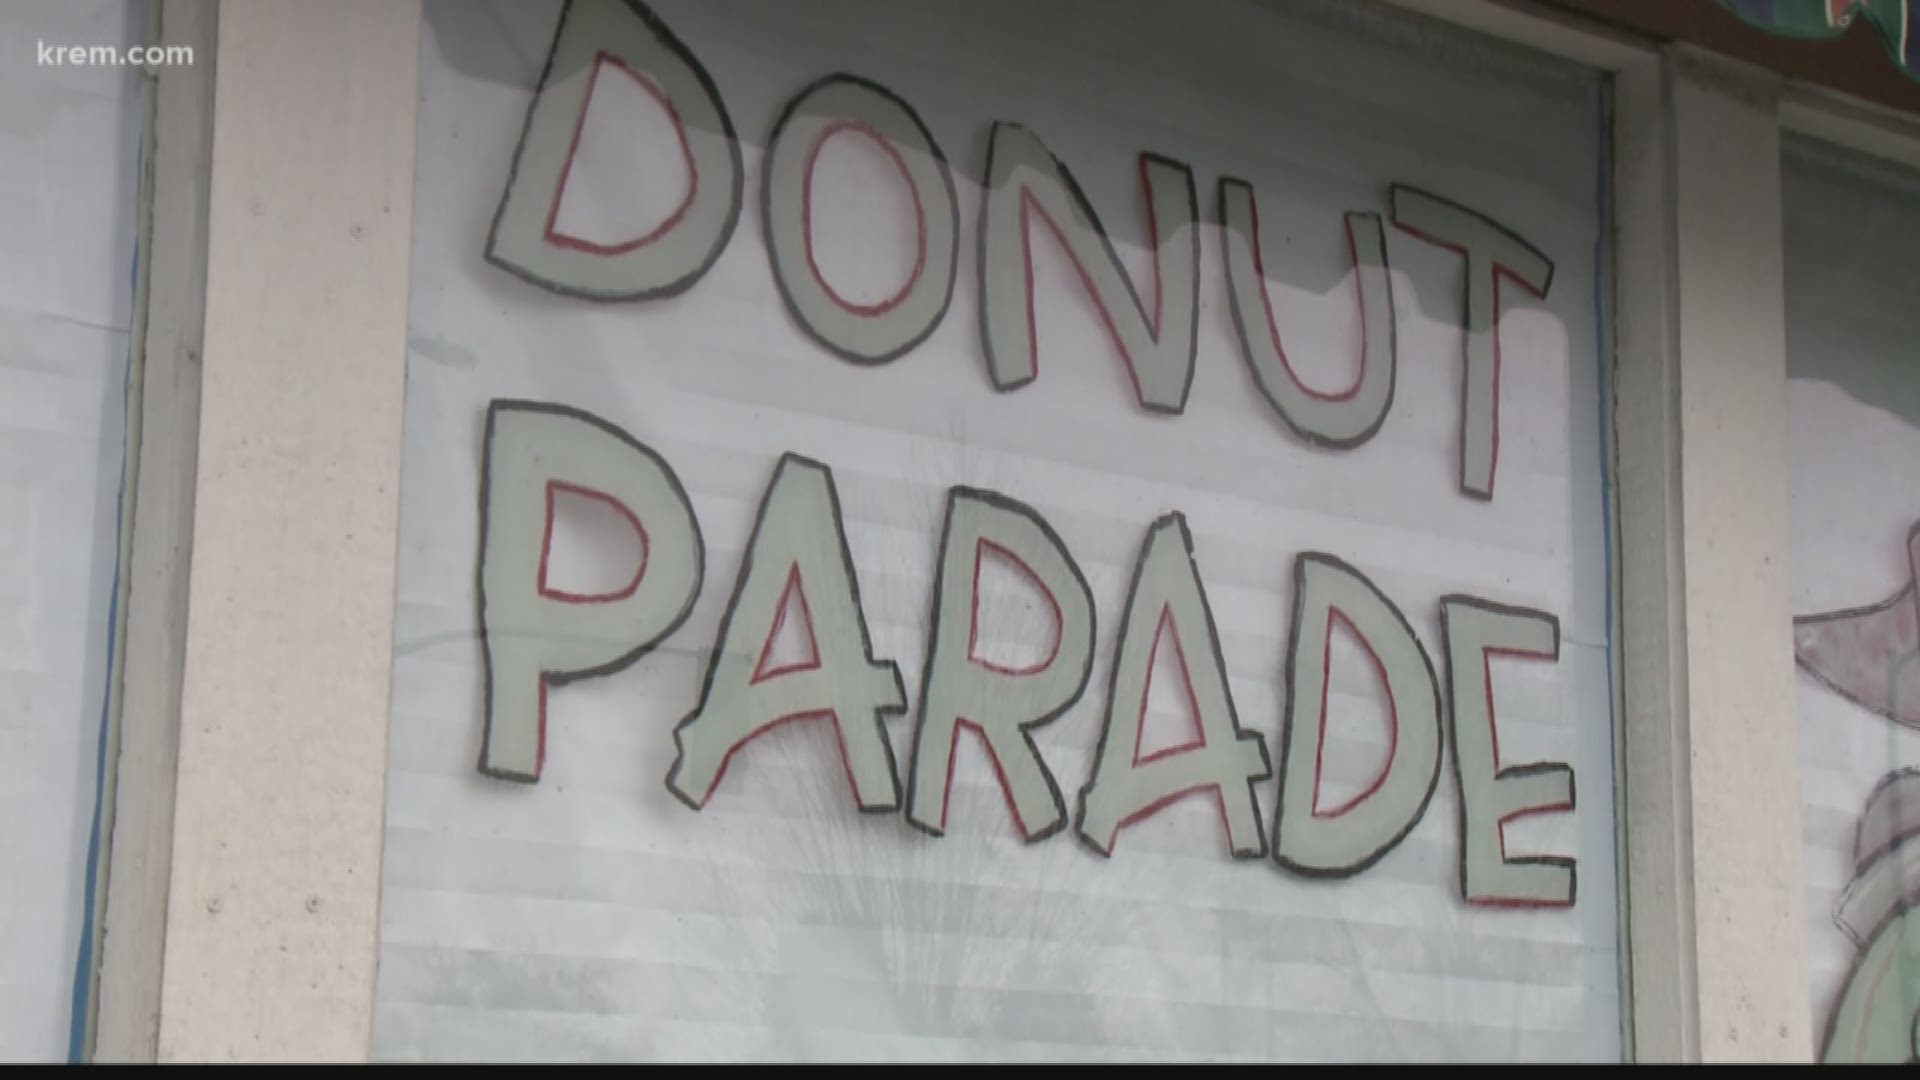 KREM reporter Amanda Roley spoke with Nathan Peabody, a former Donut Parade customer, who is working to reopen the donut shop.